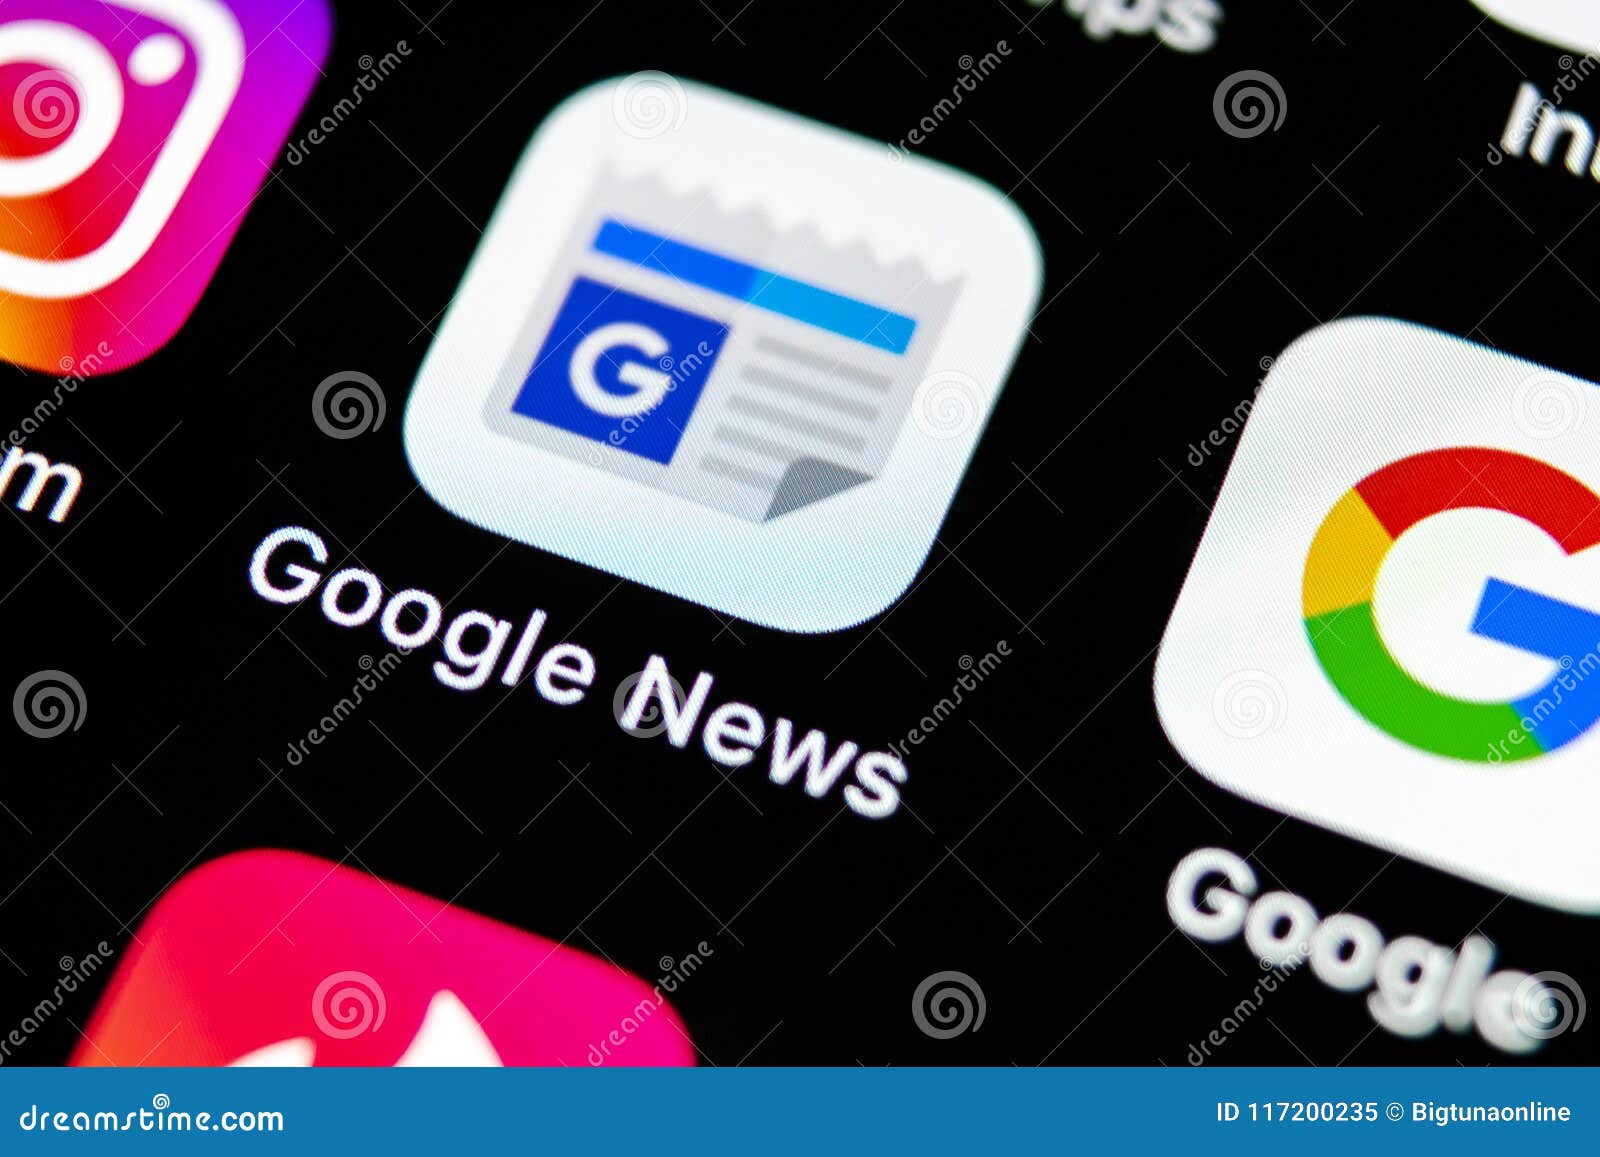 Google News Application Icon On Apple Iphone X Smartphone Screen Close-Up.  Google News App Icon. Social Network Editorial Image - Image Of Company,  Engine: 117200235